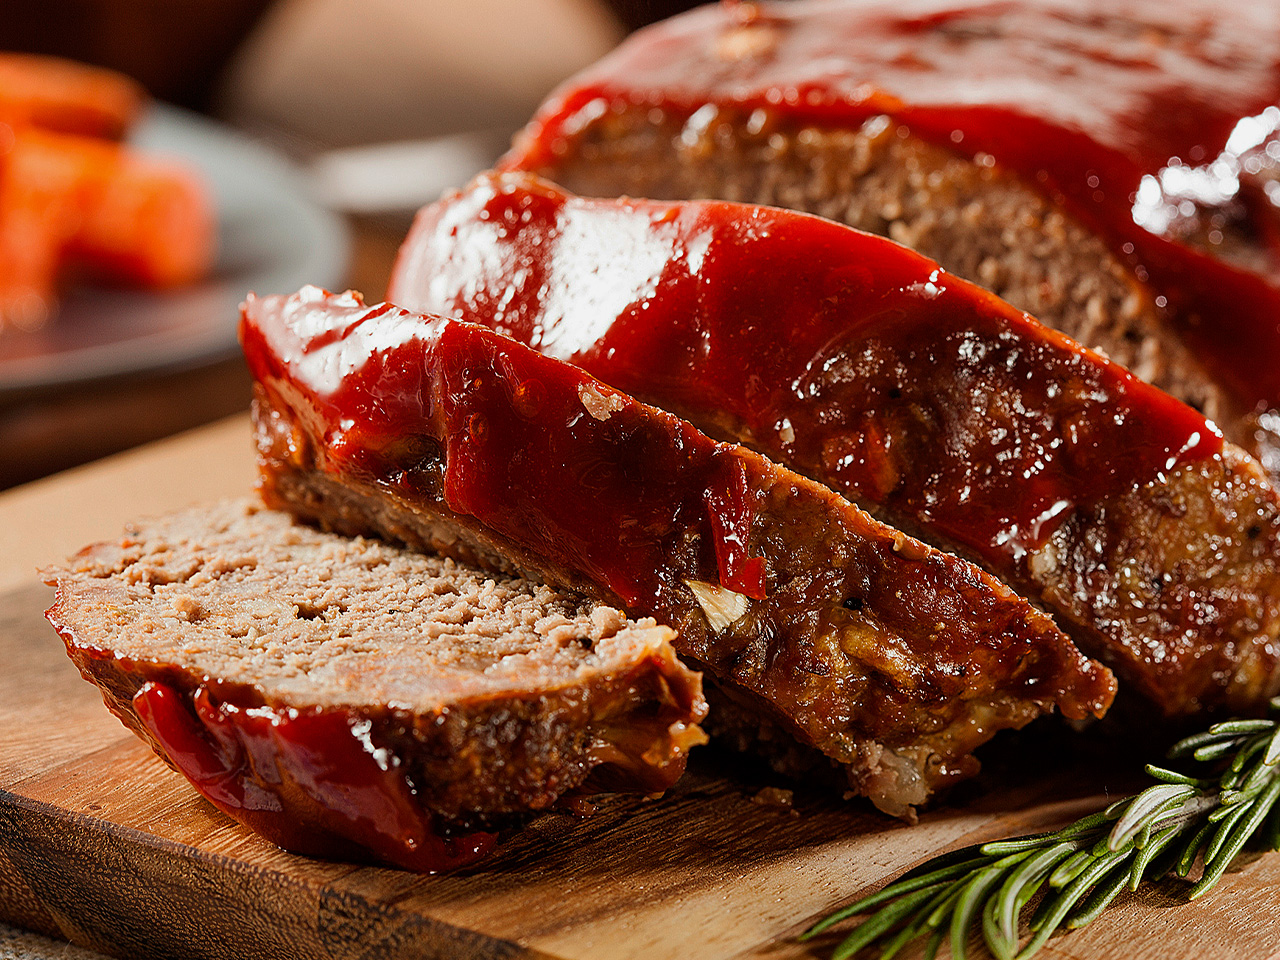 How Long To Bake Meatloaf 325 : Norms Meatloaf Recipe Los ...